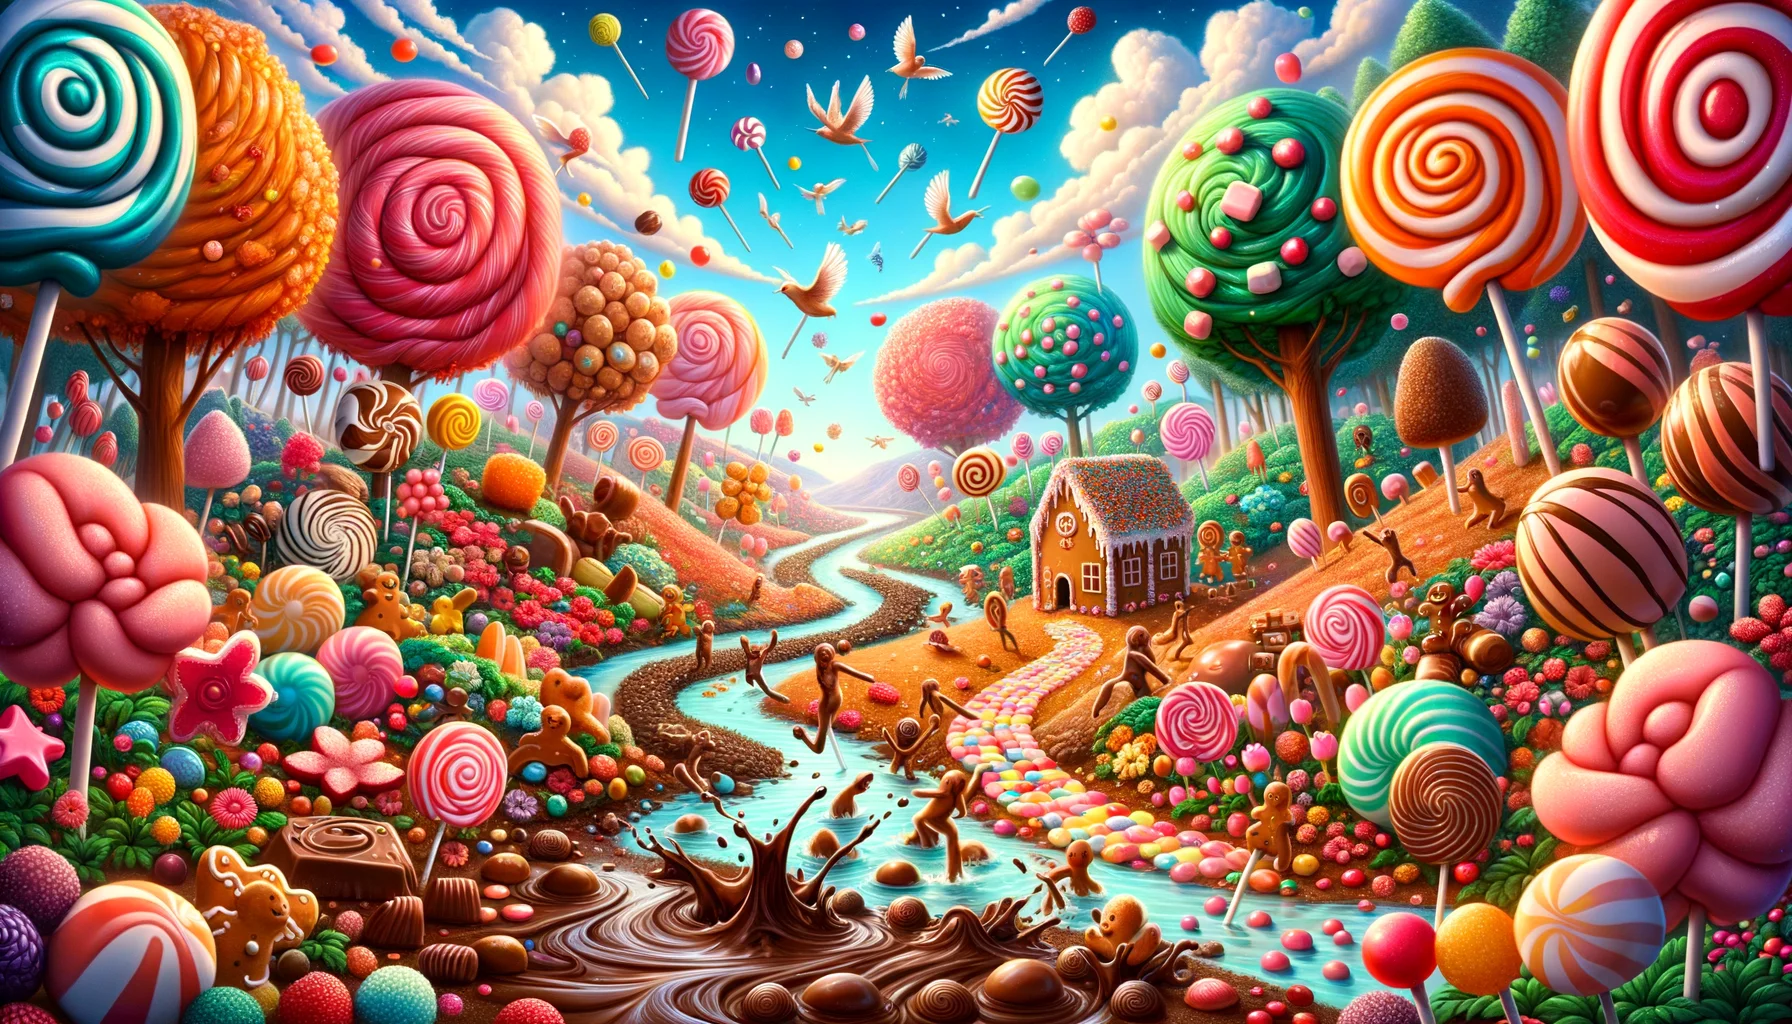 Imagine a surreal yet realistic scenario where lollipop trees and jellybean pathways come alive. Picture a whimsical landscape with chocolate rivers flowing across and marshmallow bushes dotting the scenery. Peppermint flowers are blooming under a sky filled with cotton candy clouds. Gumdrop birds are happily chirping while a gingerbread house is sitting snugly in the middle of the scene, as a symbol of homely warmth. Nearby, a group of people of various genders and descents are creating more candy decorations, laughing with pure joy with their hands sticky from candy floss. The scene is drenched in vibrant and luscious colors, creating an ambiance of sweet delight.